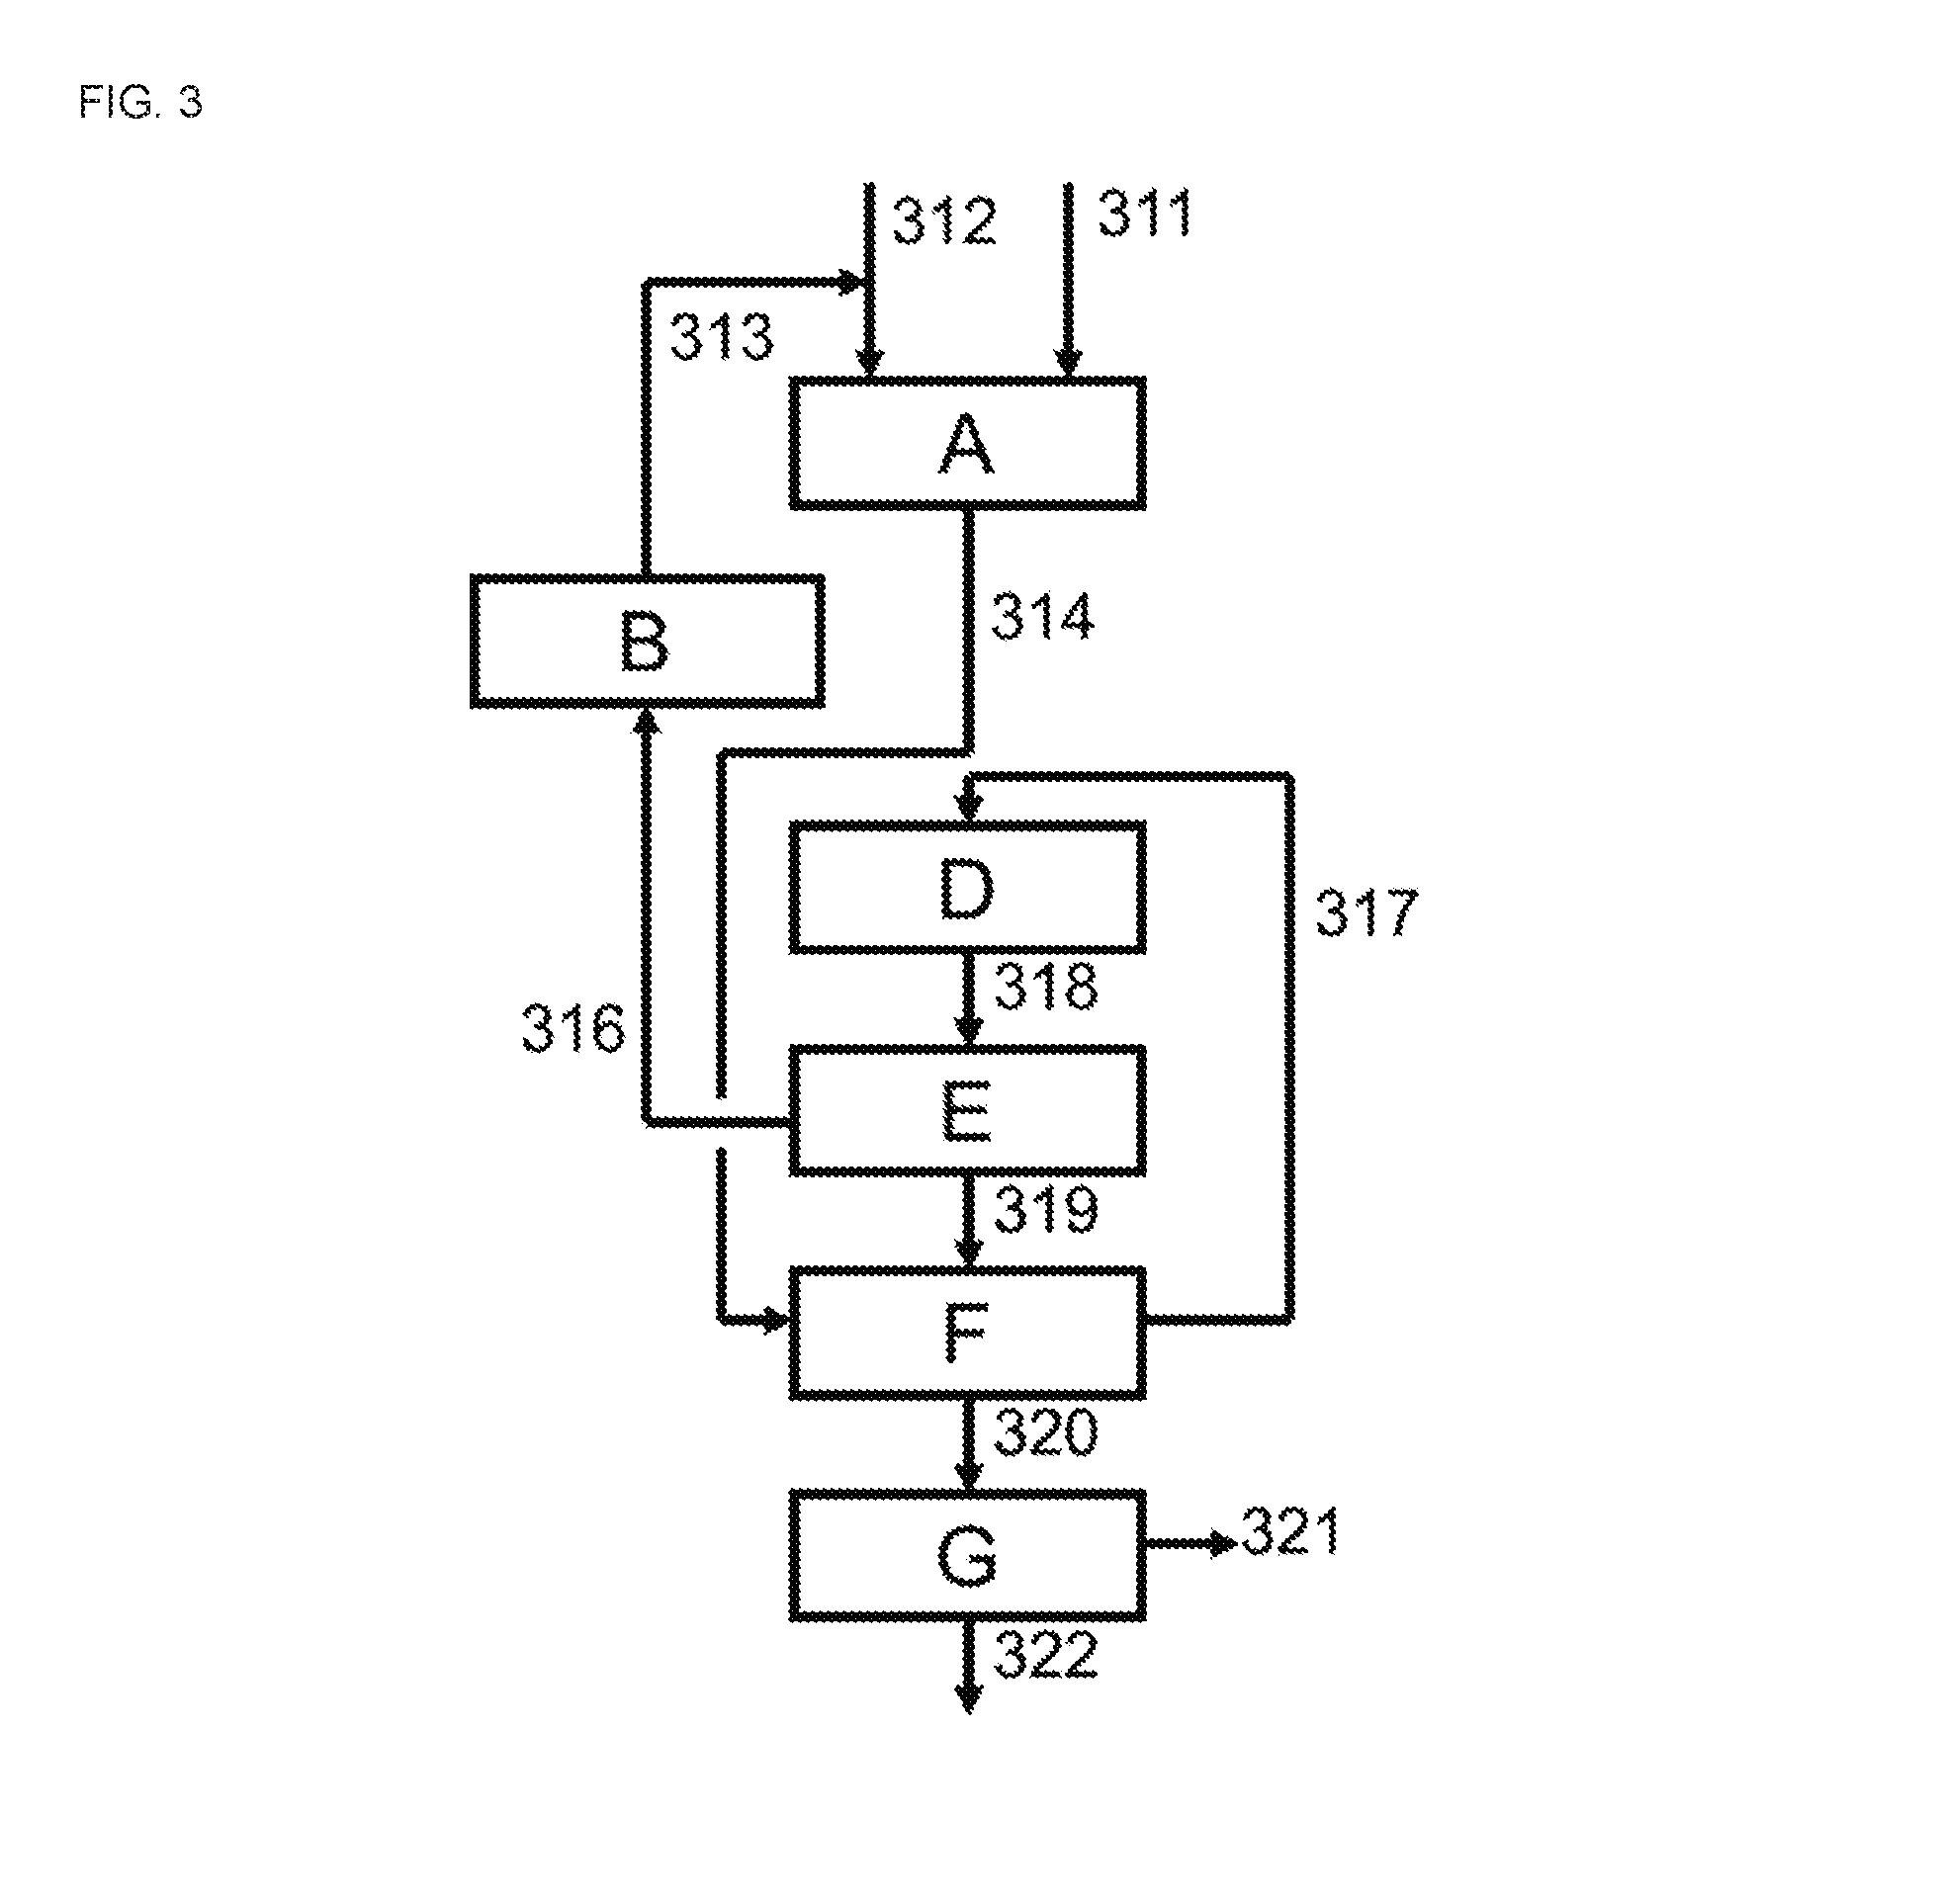 Process for the production of a mixture comprising cyclohexanone and cyclohexanol from phenol